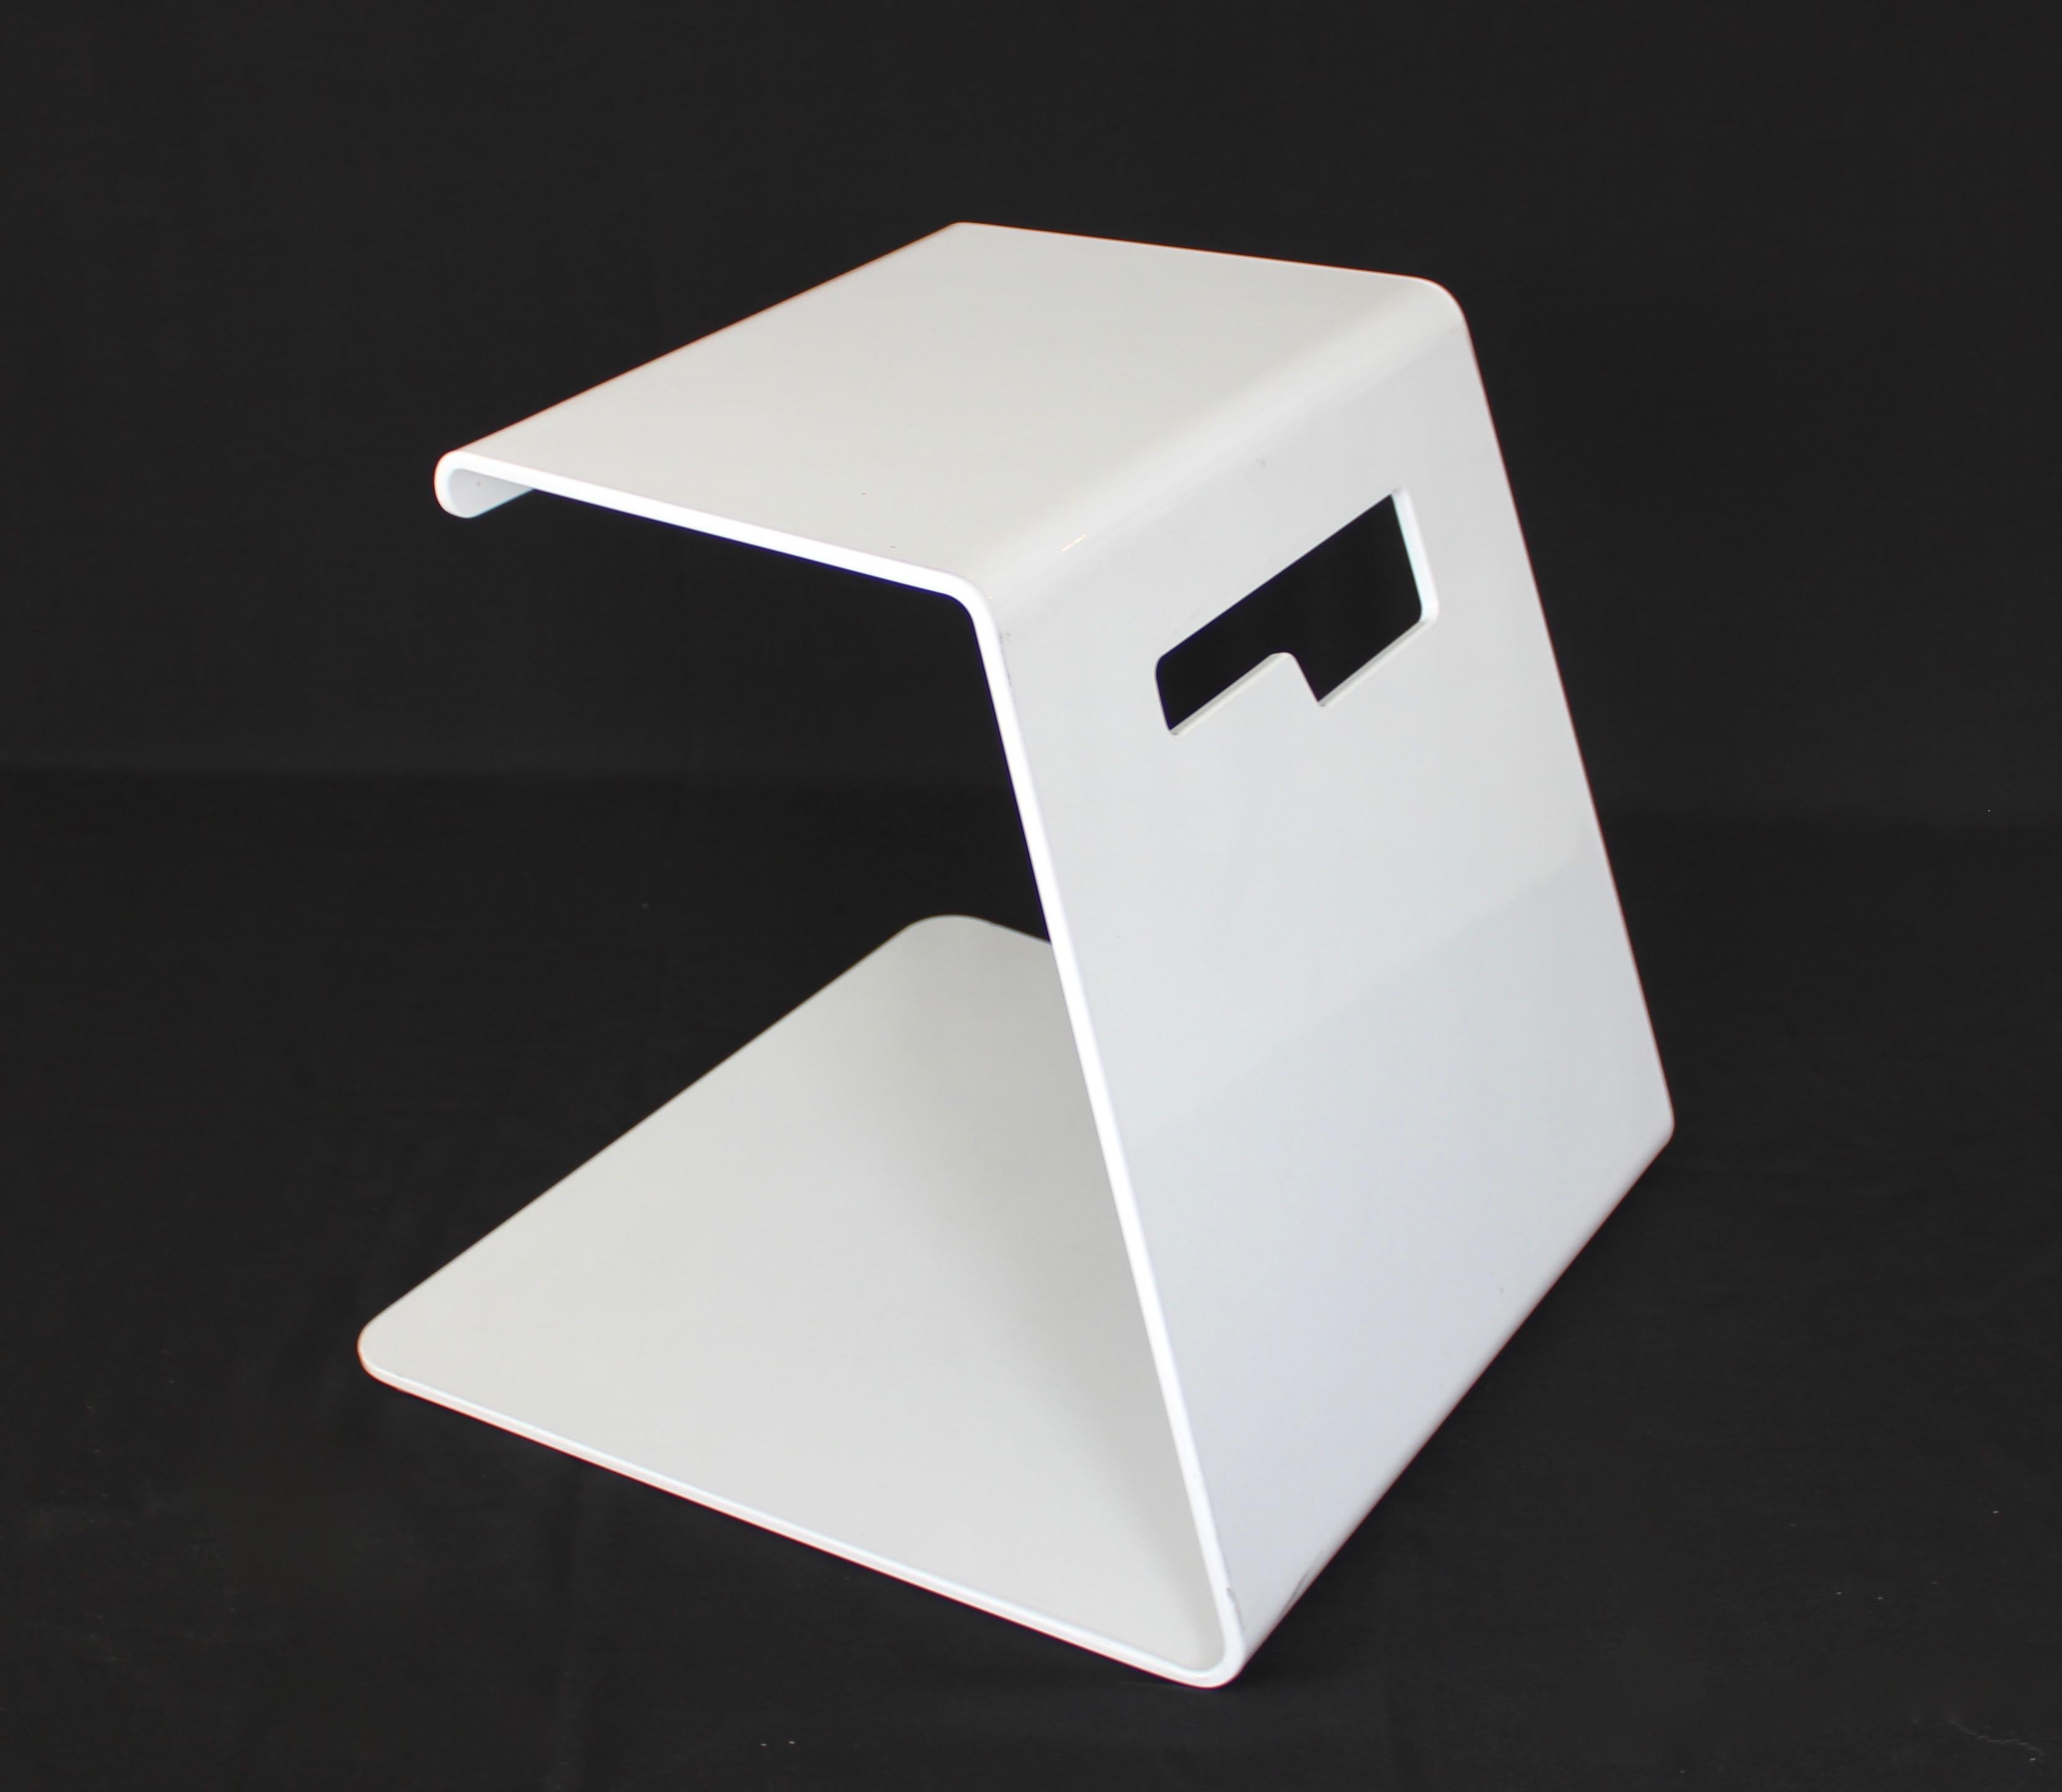 Jonathan Nesci folded aluminum white powder coated Jack Stool. The Jack Stool debuted at ICCF in 2007 and helped to launch the career of contemporary designer Jonathan Nesci. 
He has gone on to produce minimalist furniture in aluminum, both powder